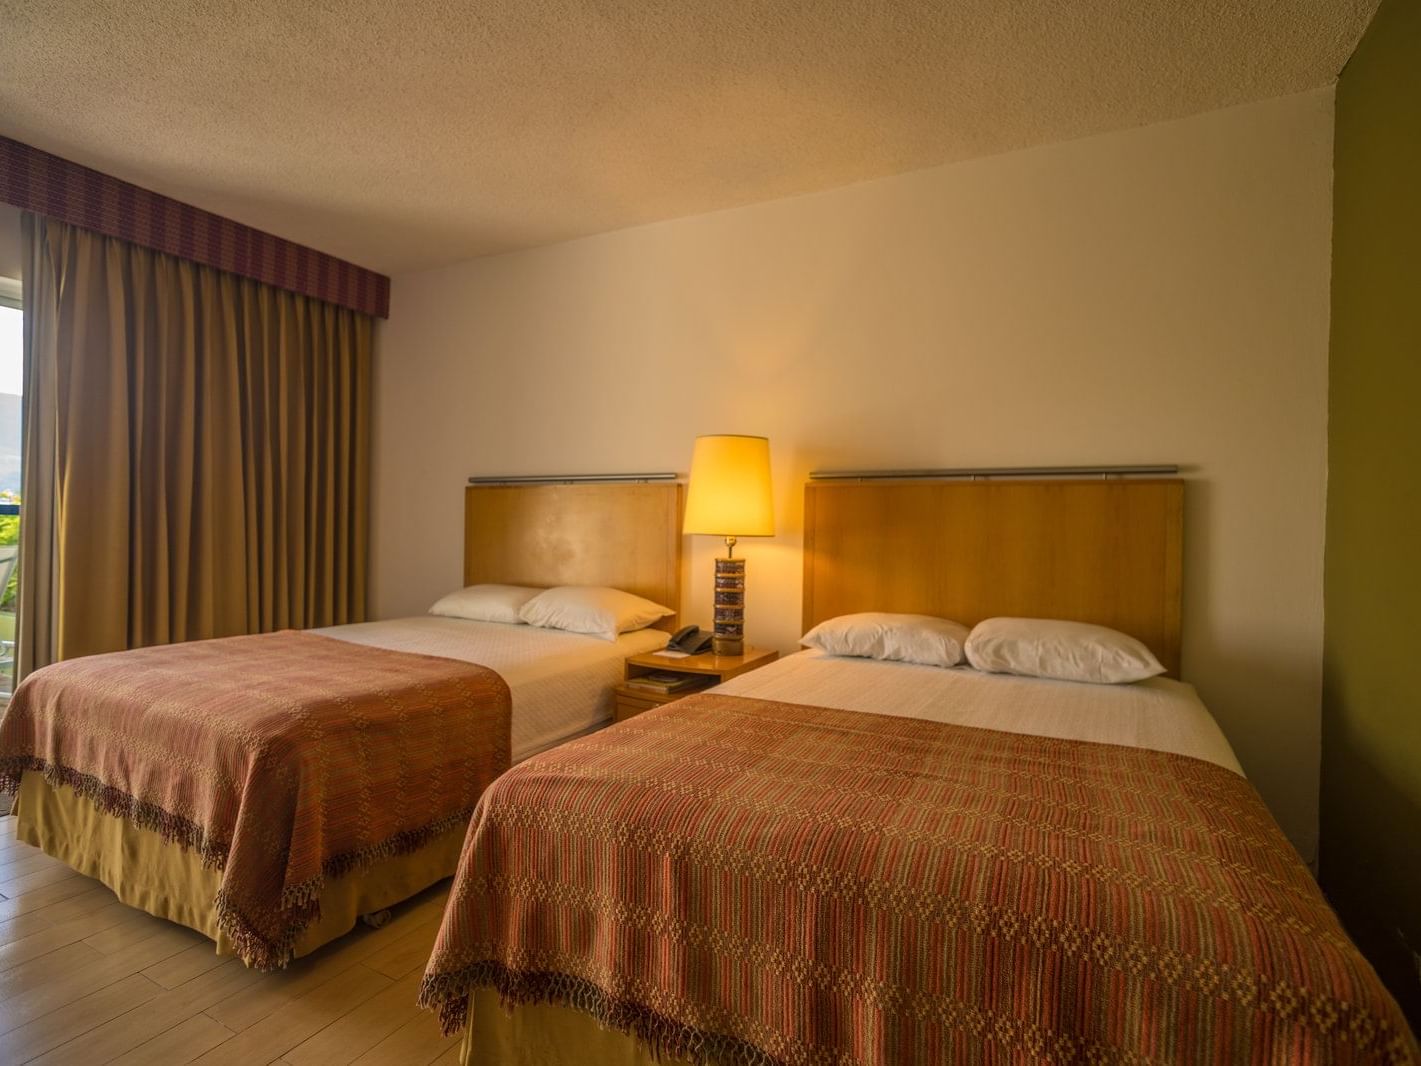 2 cozy beds and a side table in Standard Room with wooden floors at Porta Hotel del Lago